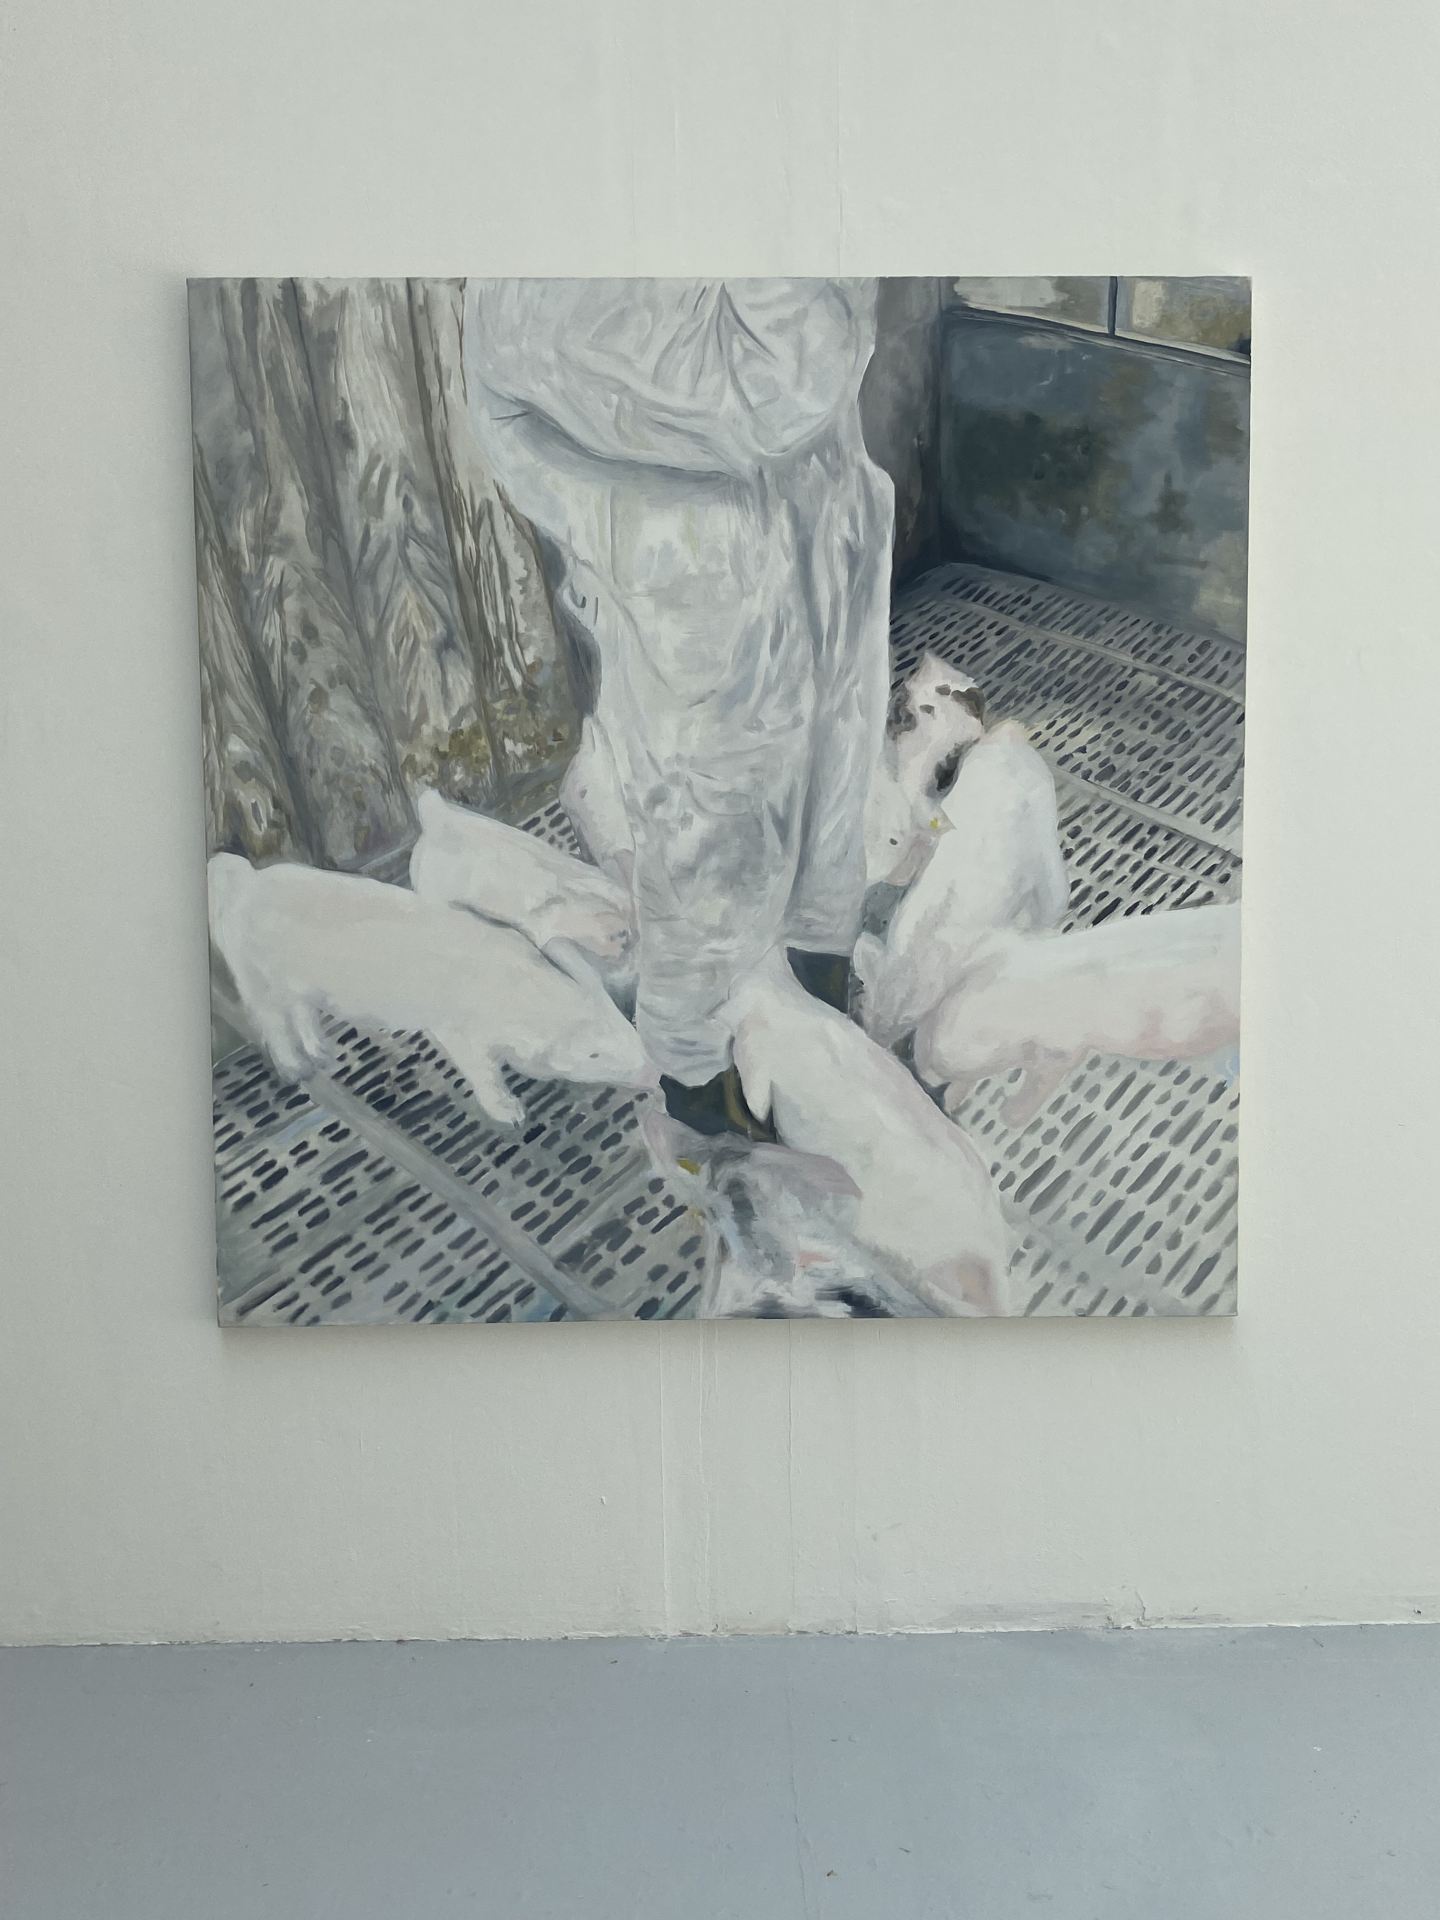 A painting of several pigs feeding on a metal floor..